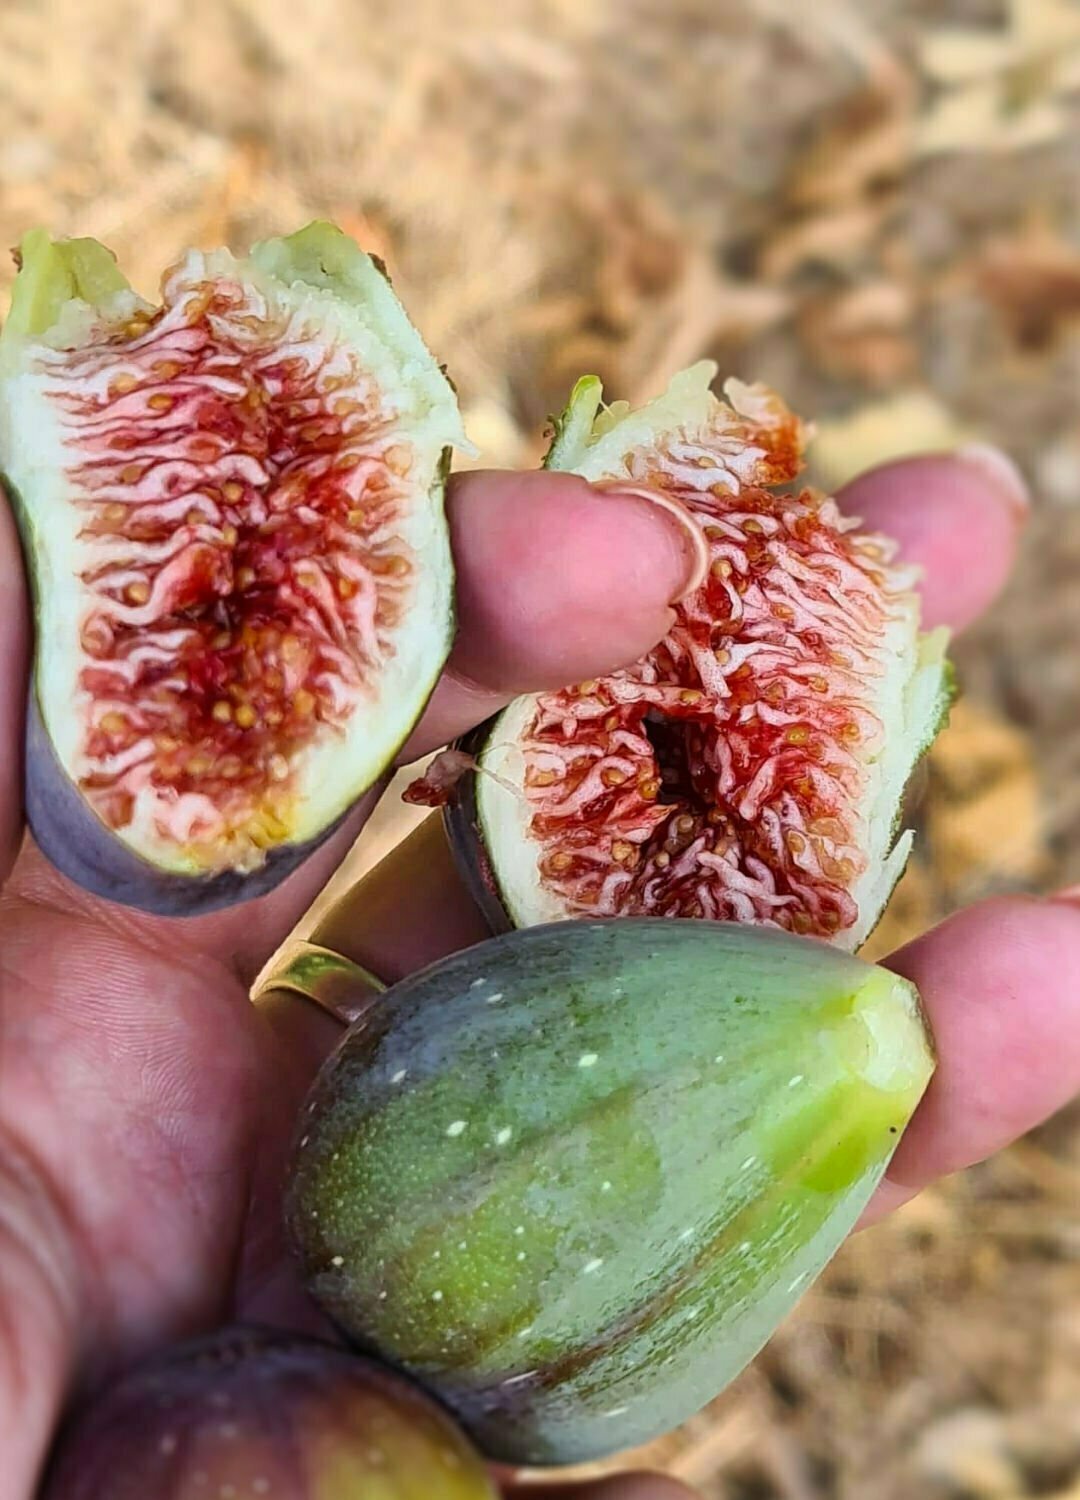 a handful of fresh figs with one broken open exposing the red flesh and flower of the fig.